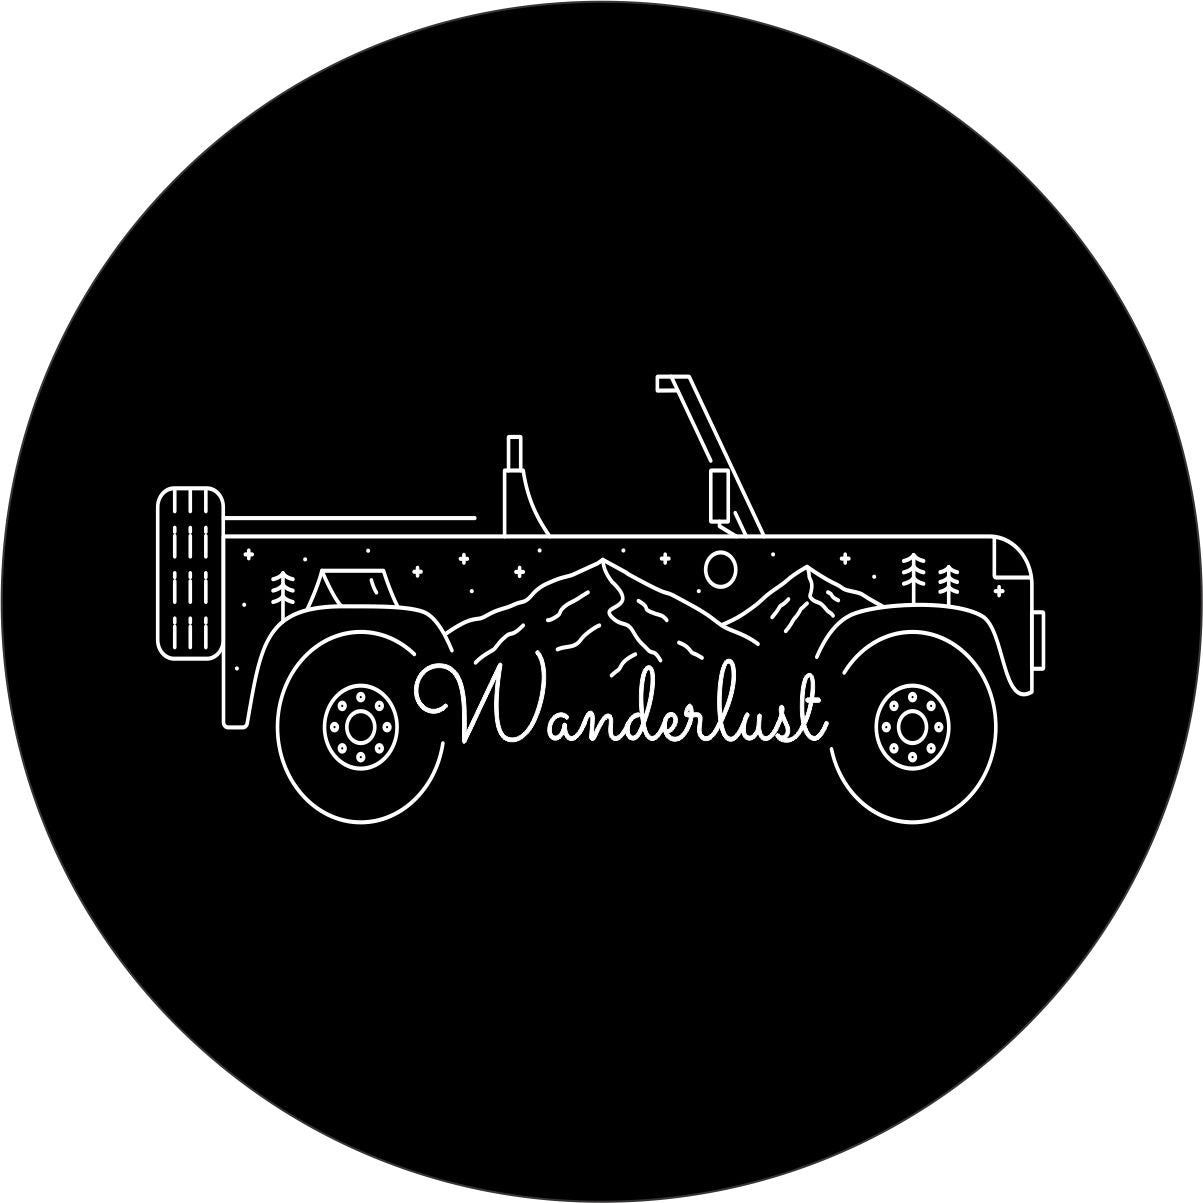 Wanderlust spare tire cover. Thin line simple and unique SUV with mountains and the word wanderlust spare tire cover for Jeep, Bronco, camper, RV, trailer, and more